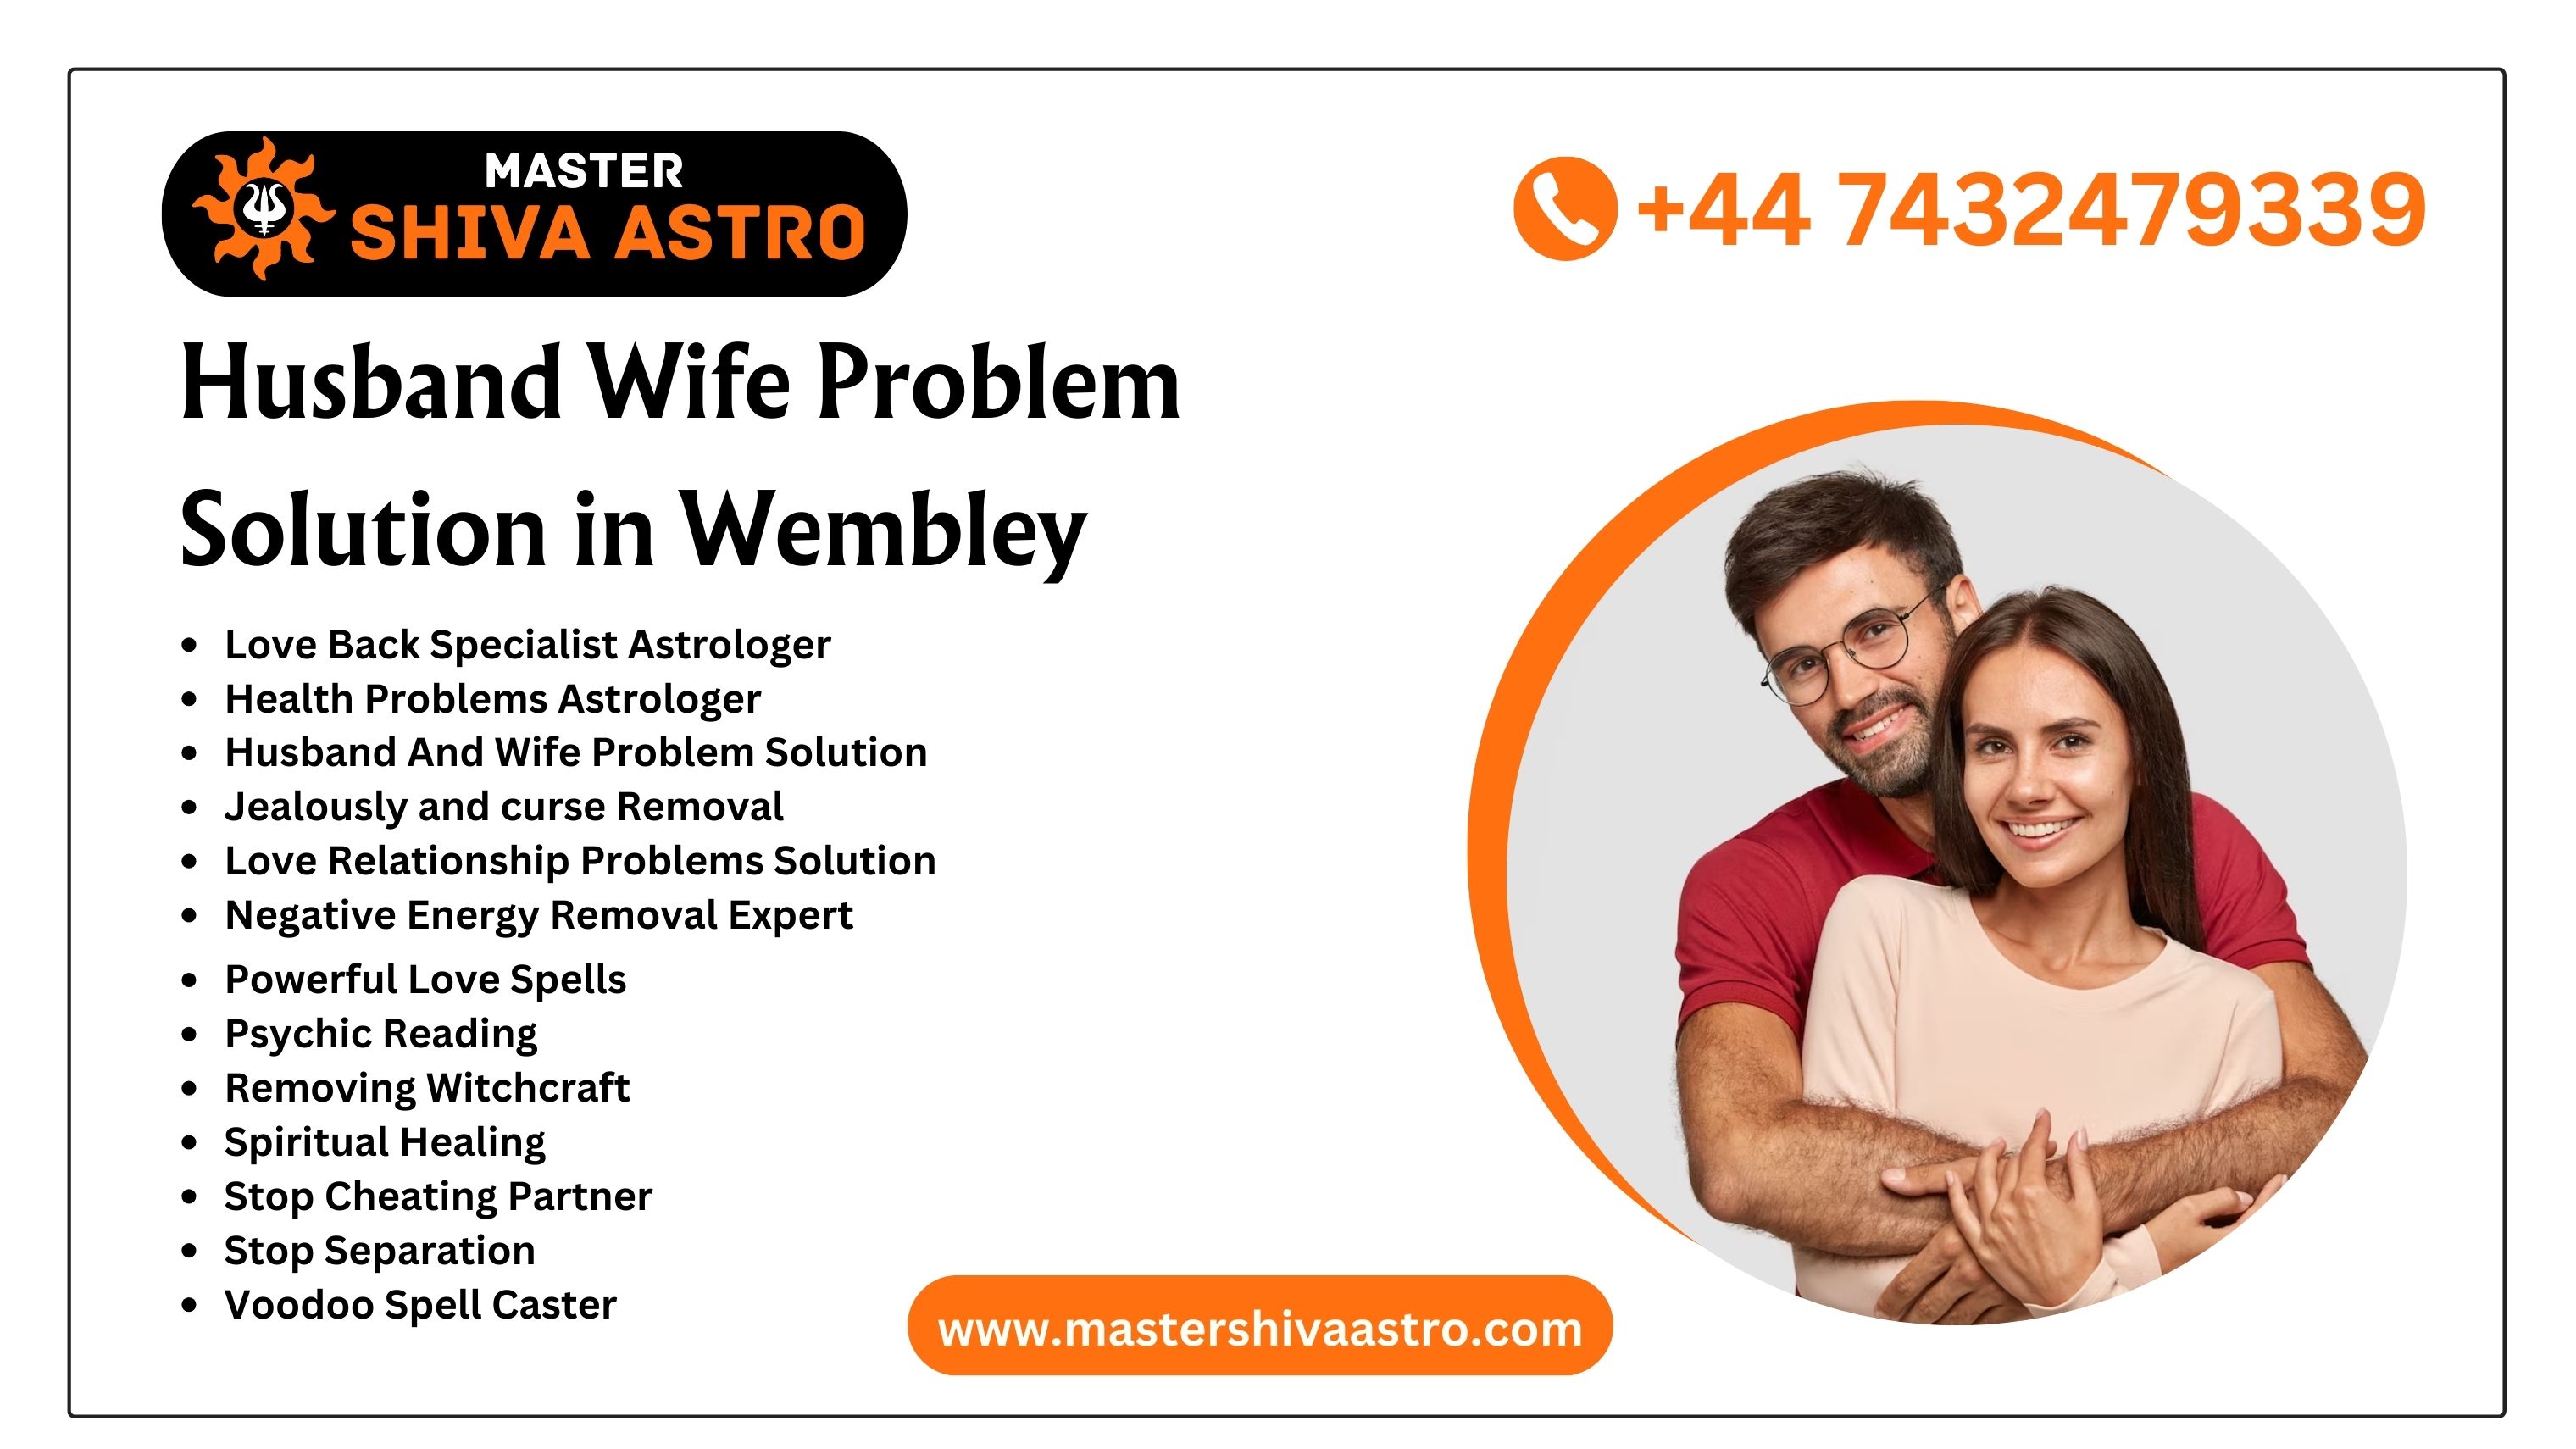 Husband Wife Problem Solution in Wembley - Master Shiva